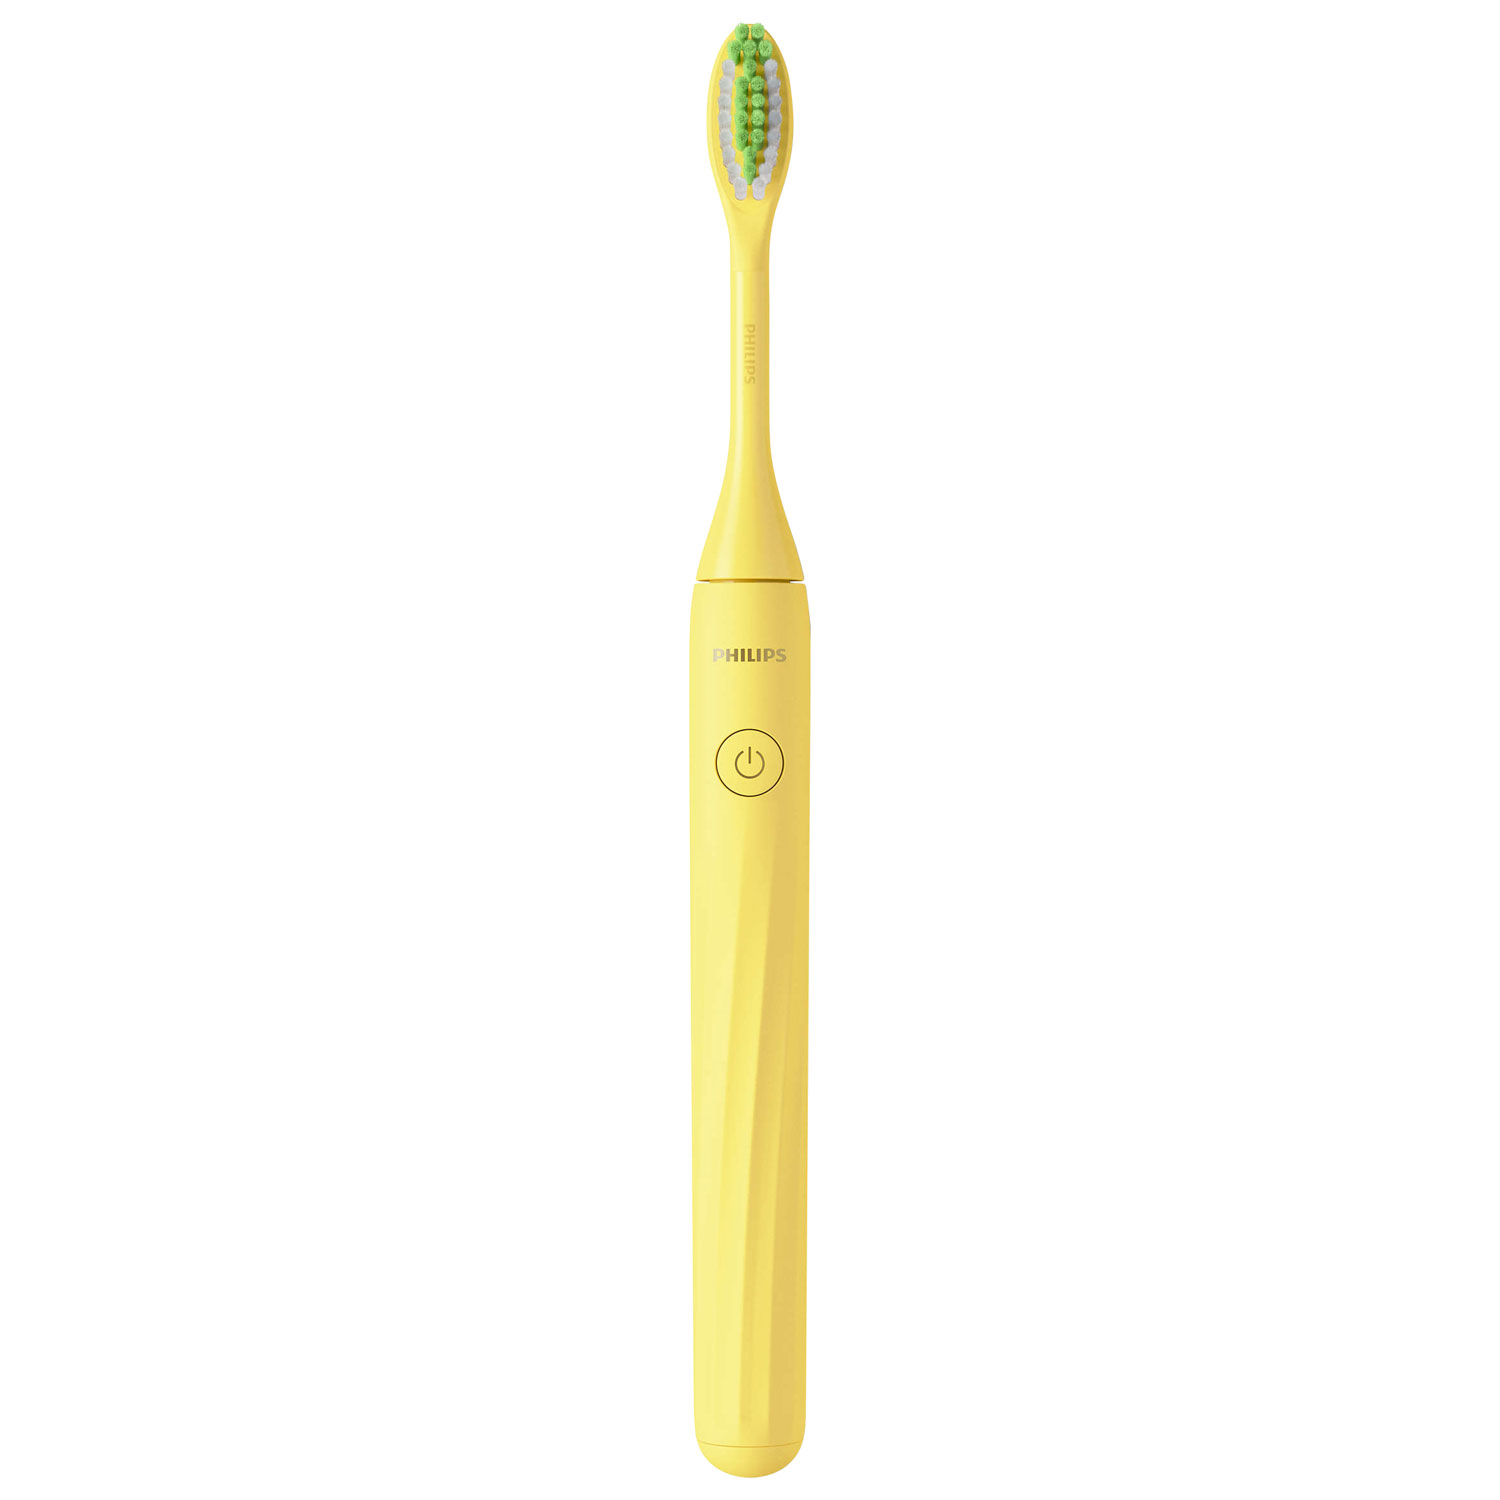 Philips One by Sonicare Battery Toothbrush (HY1100/02) - Mango Yellow